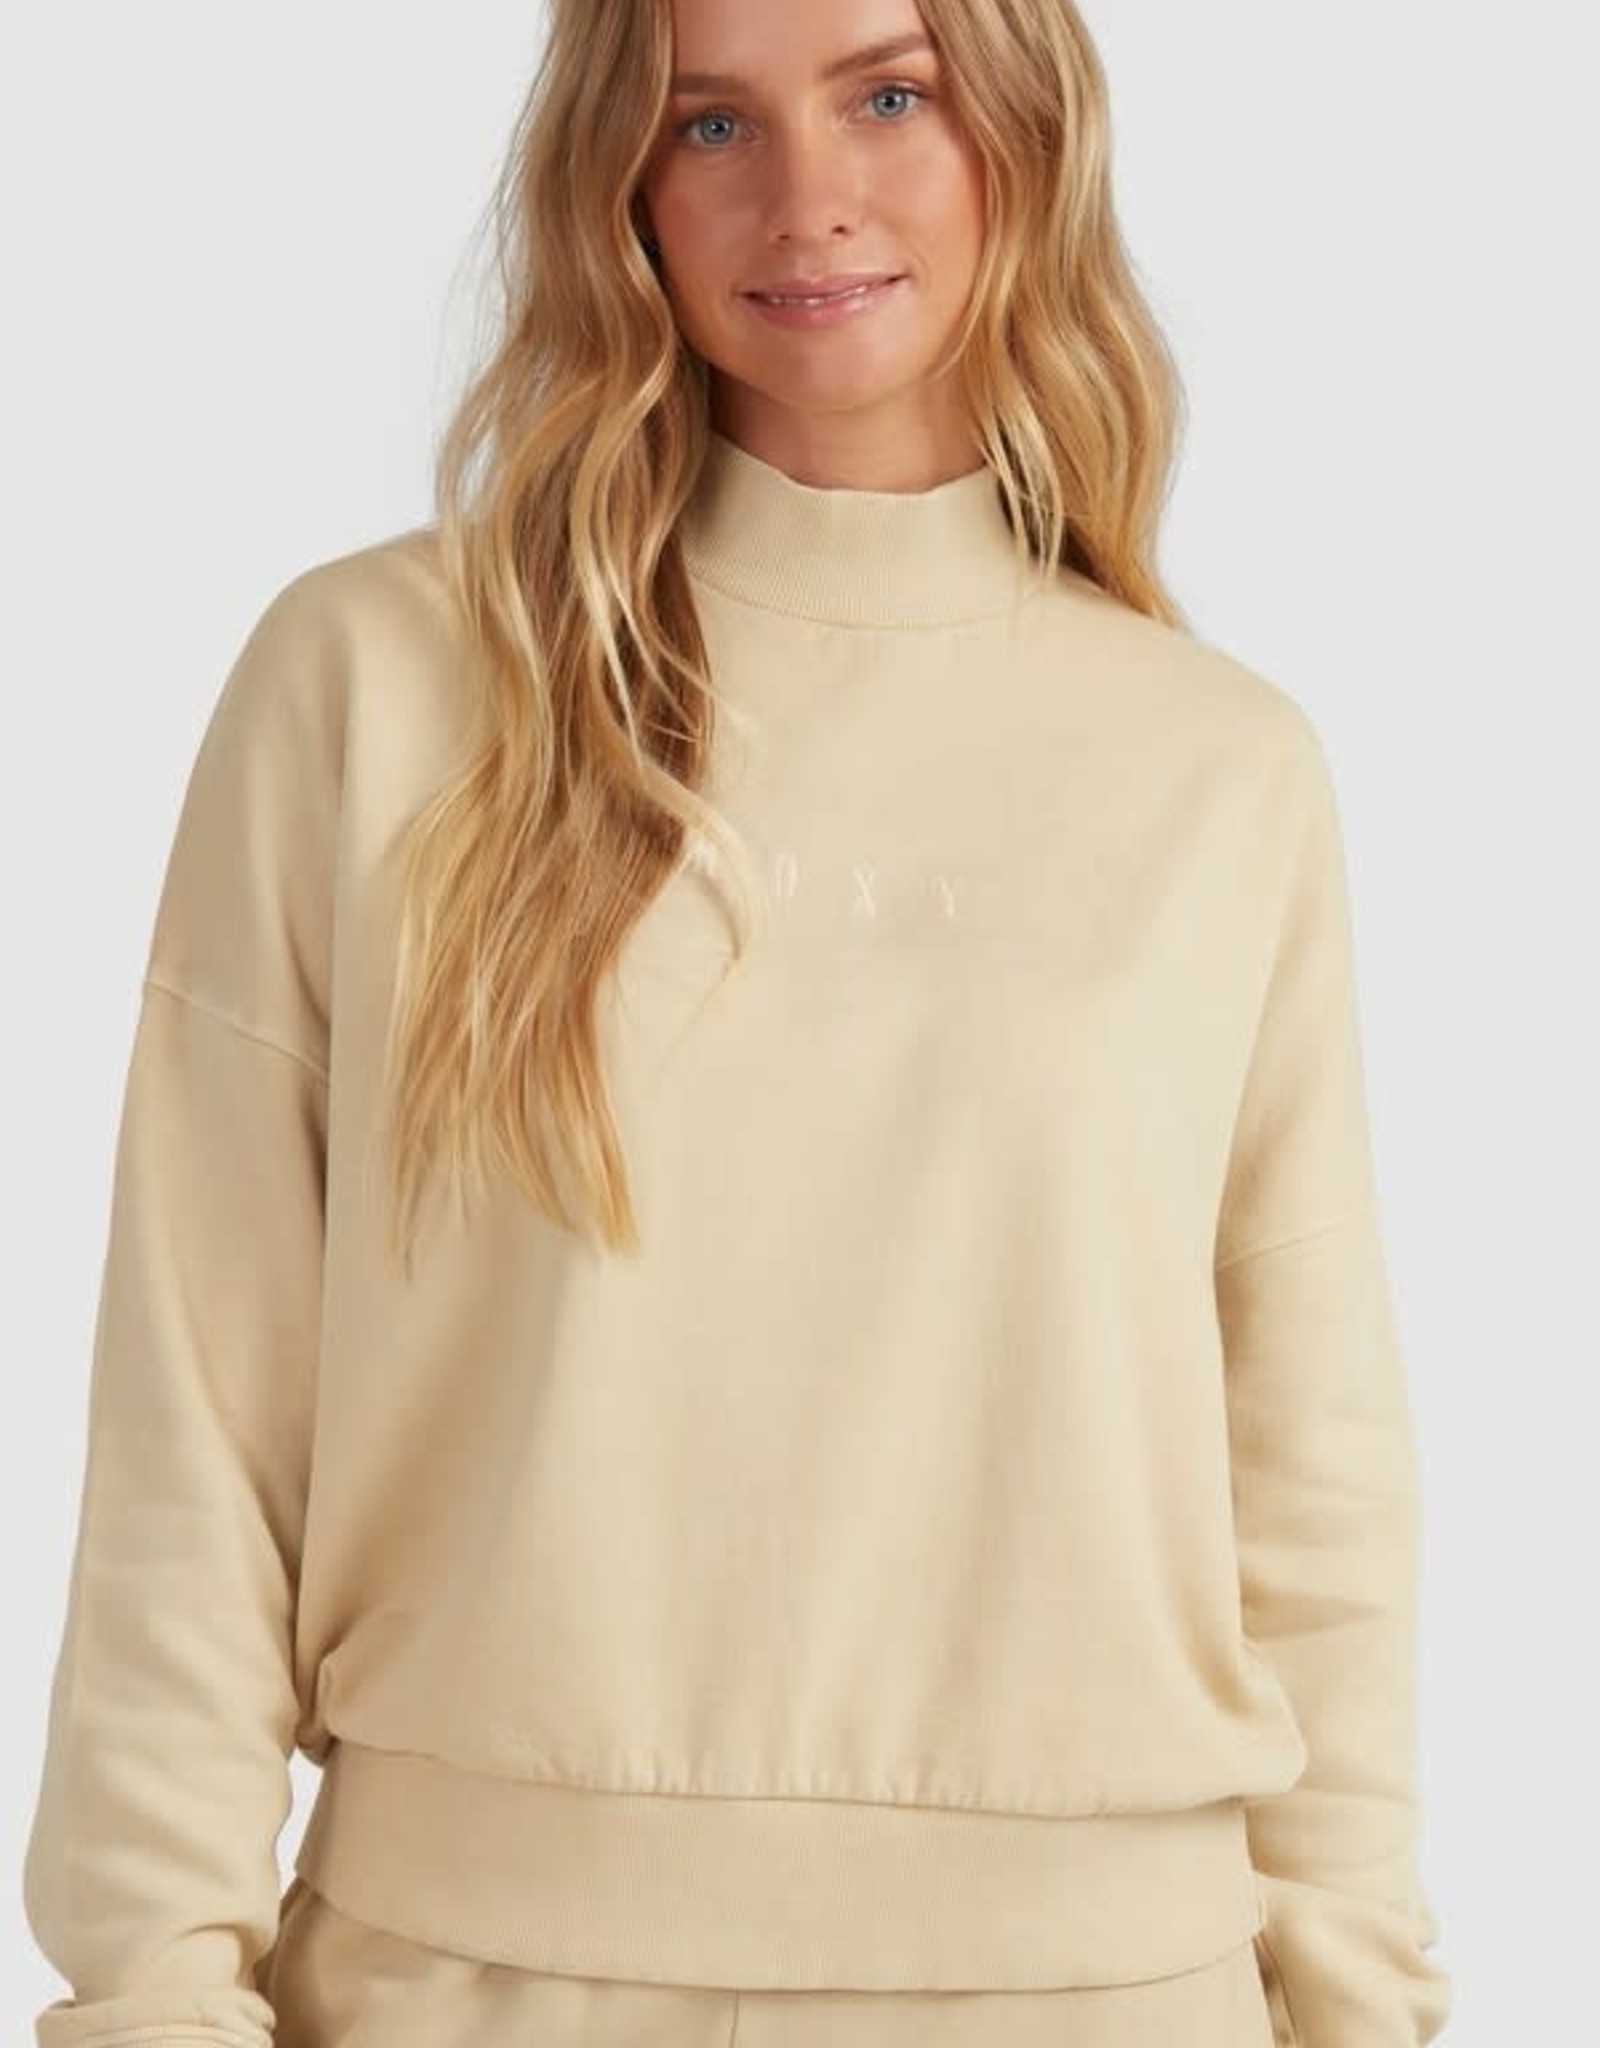 ROXY Tranquil Days Polo Neck Jumper